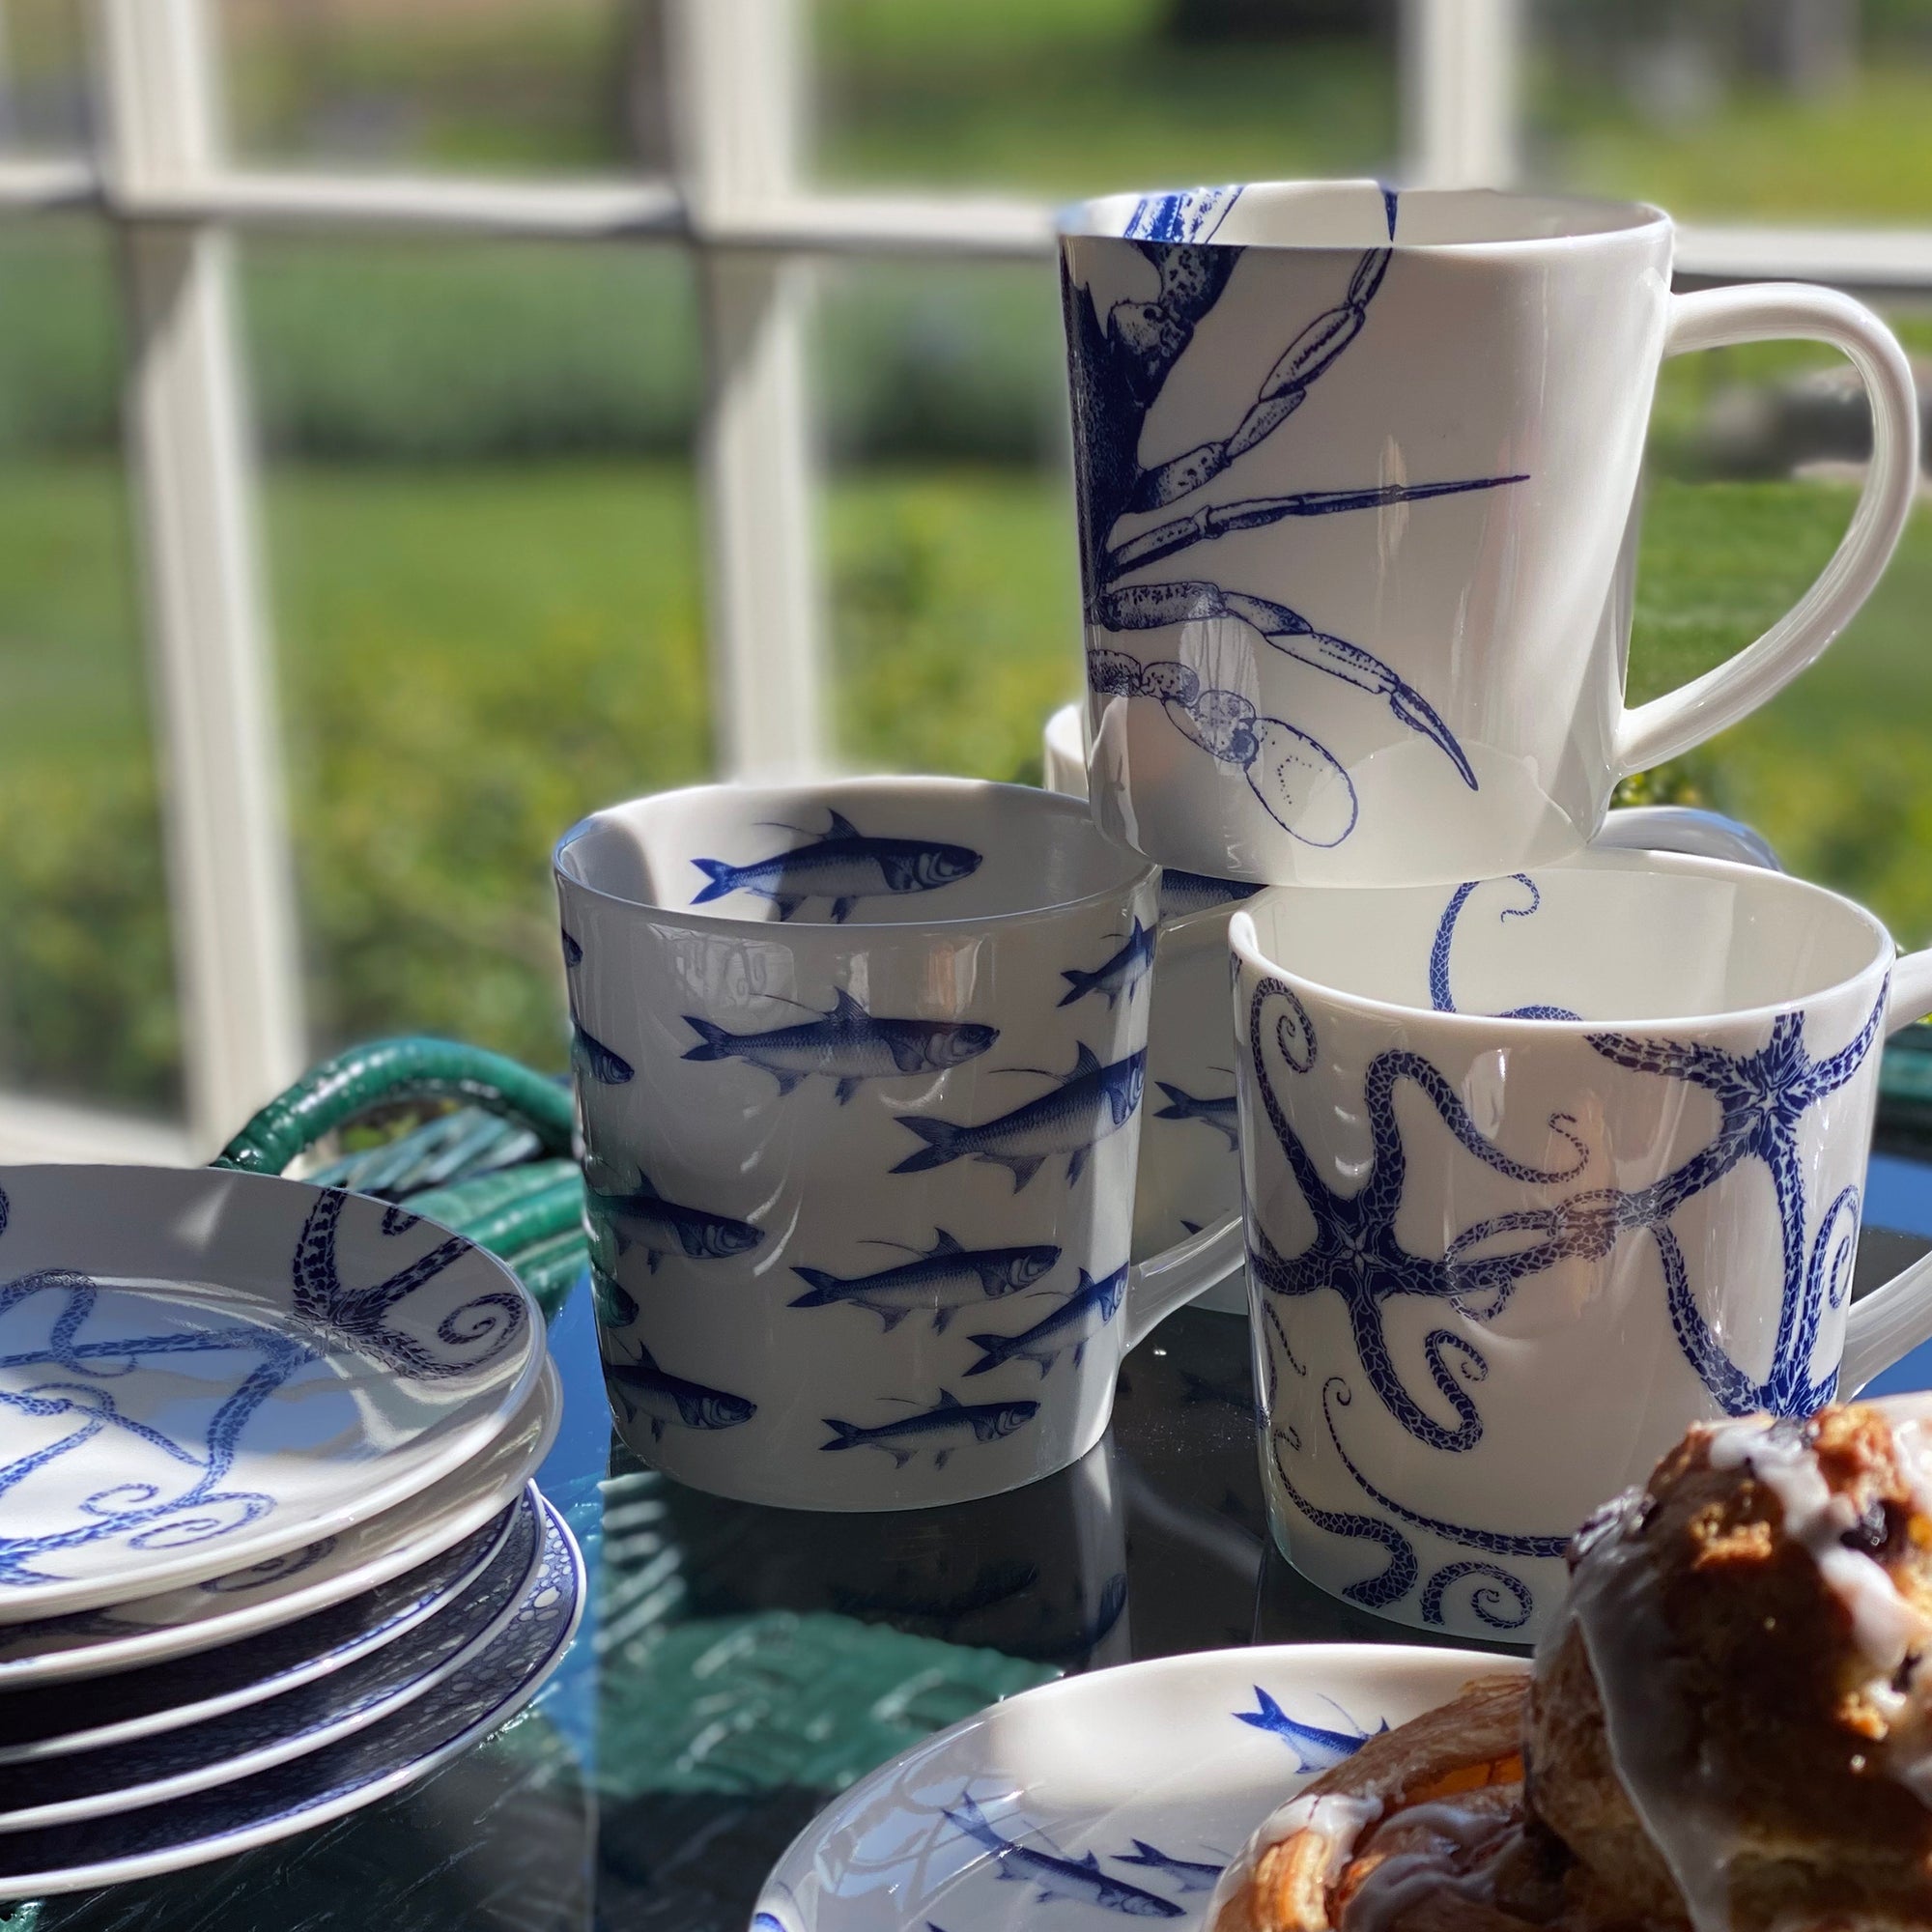 High-fired porcelain Starfish Mug by Caskata Artisanal Home with a blue octopus design; it's dishwasher safe and perfect for ocean lovers.